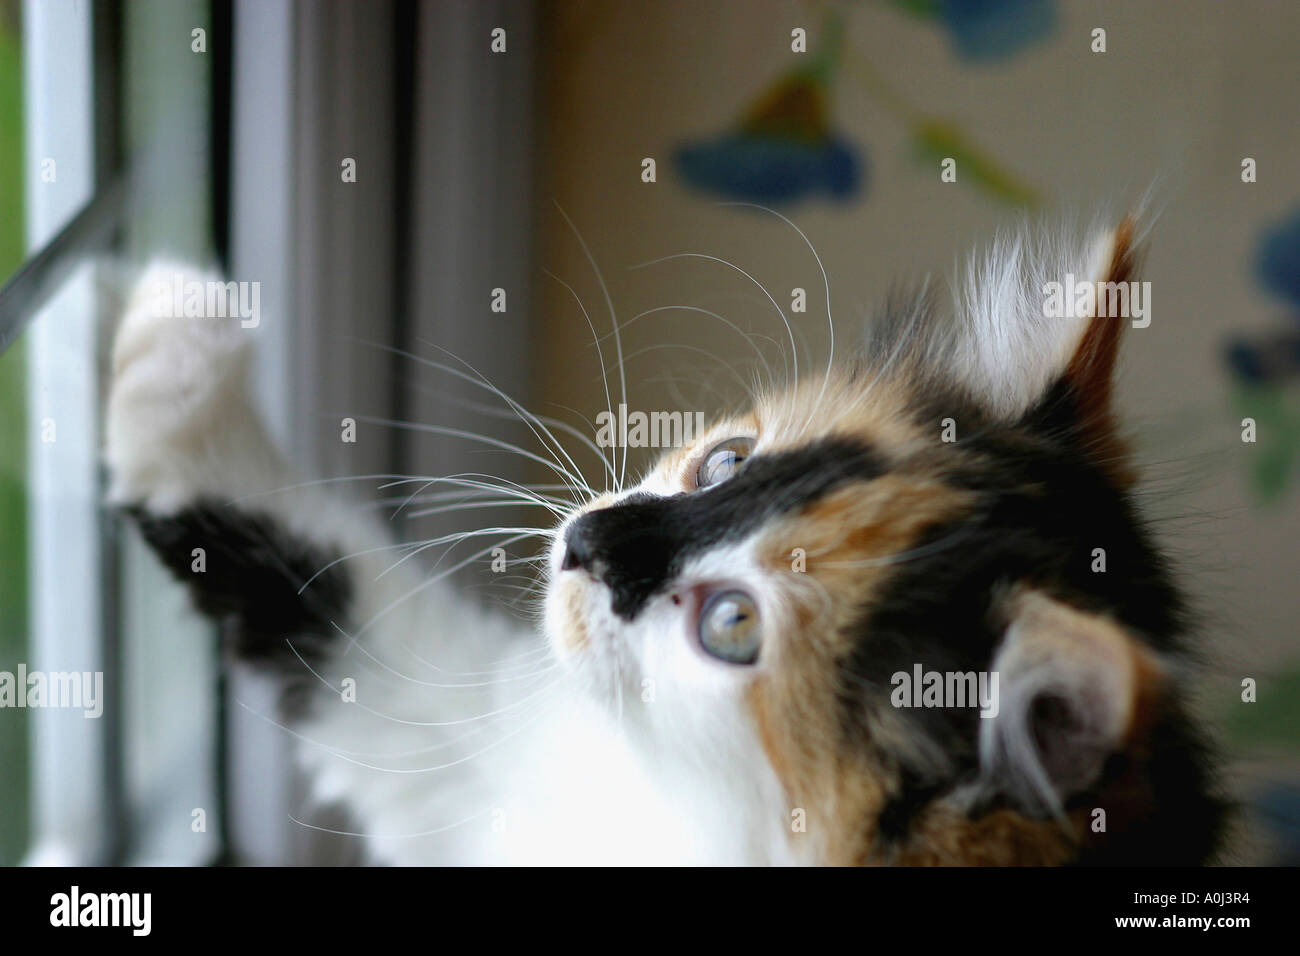 Close-up of a kitten standing against a window looking up Stock Photo